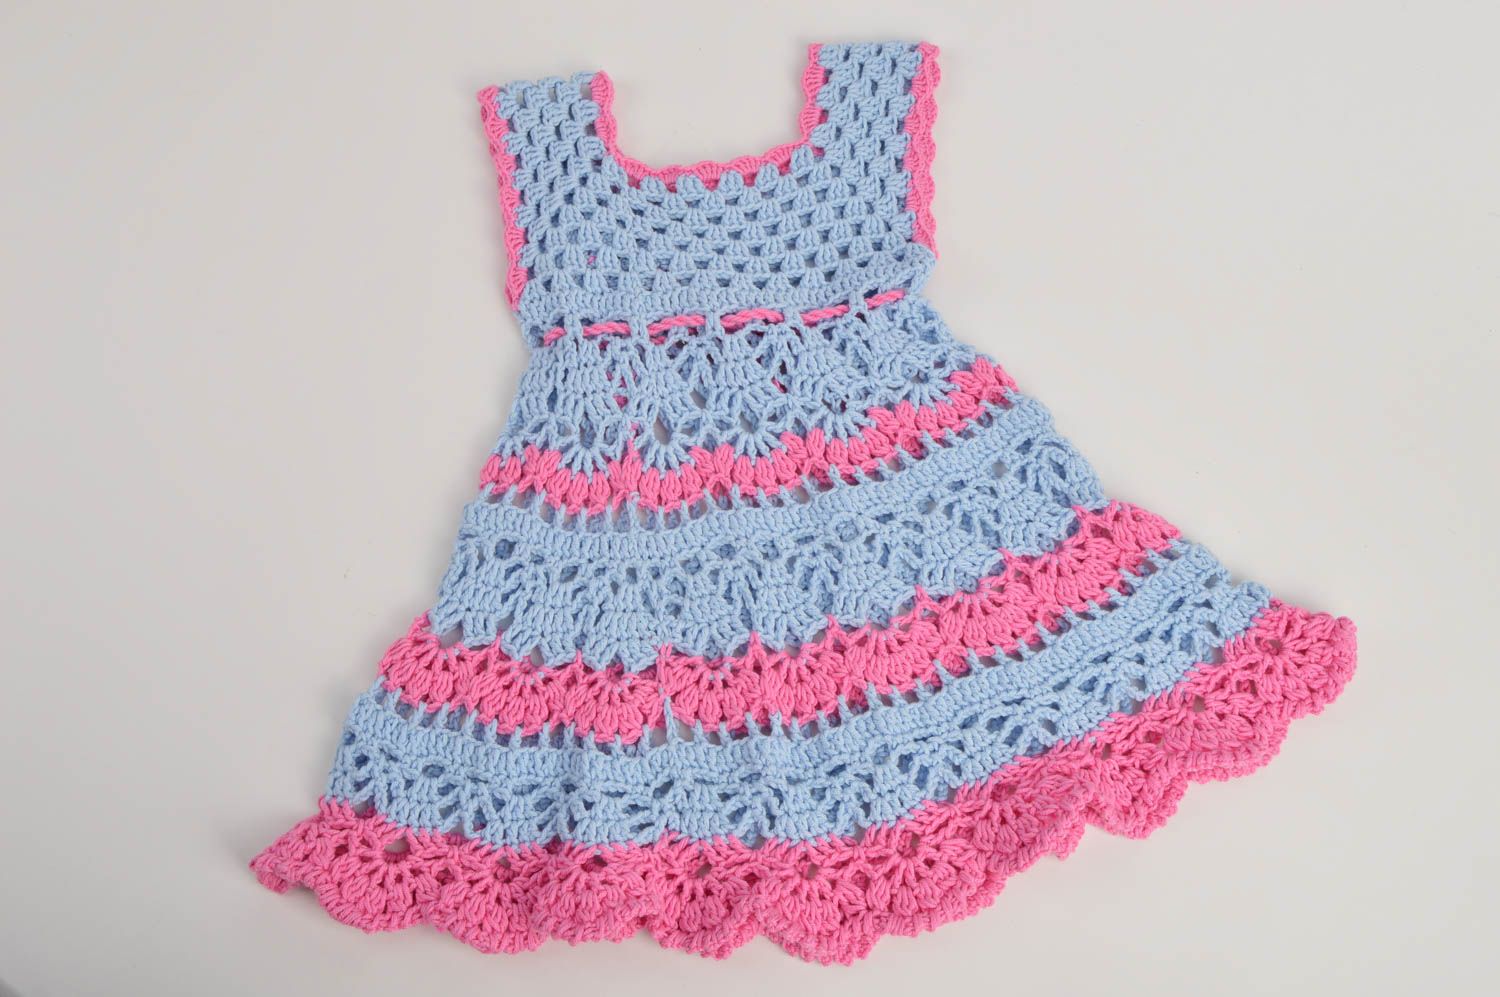 Unusual handmade crochet dress cute baby outfits designer clothes for kids photo 5